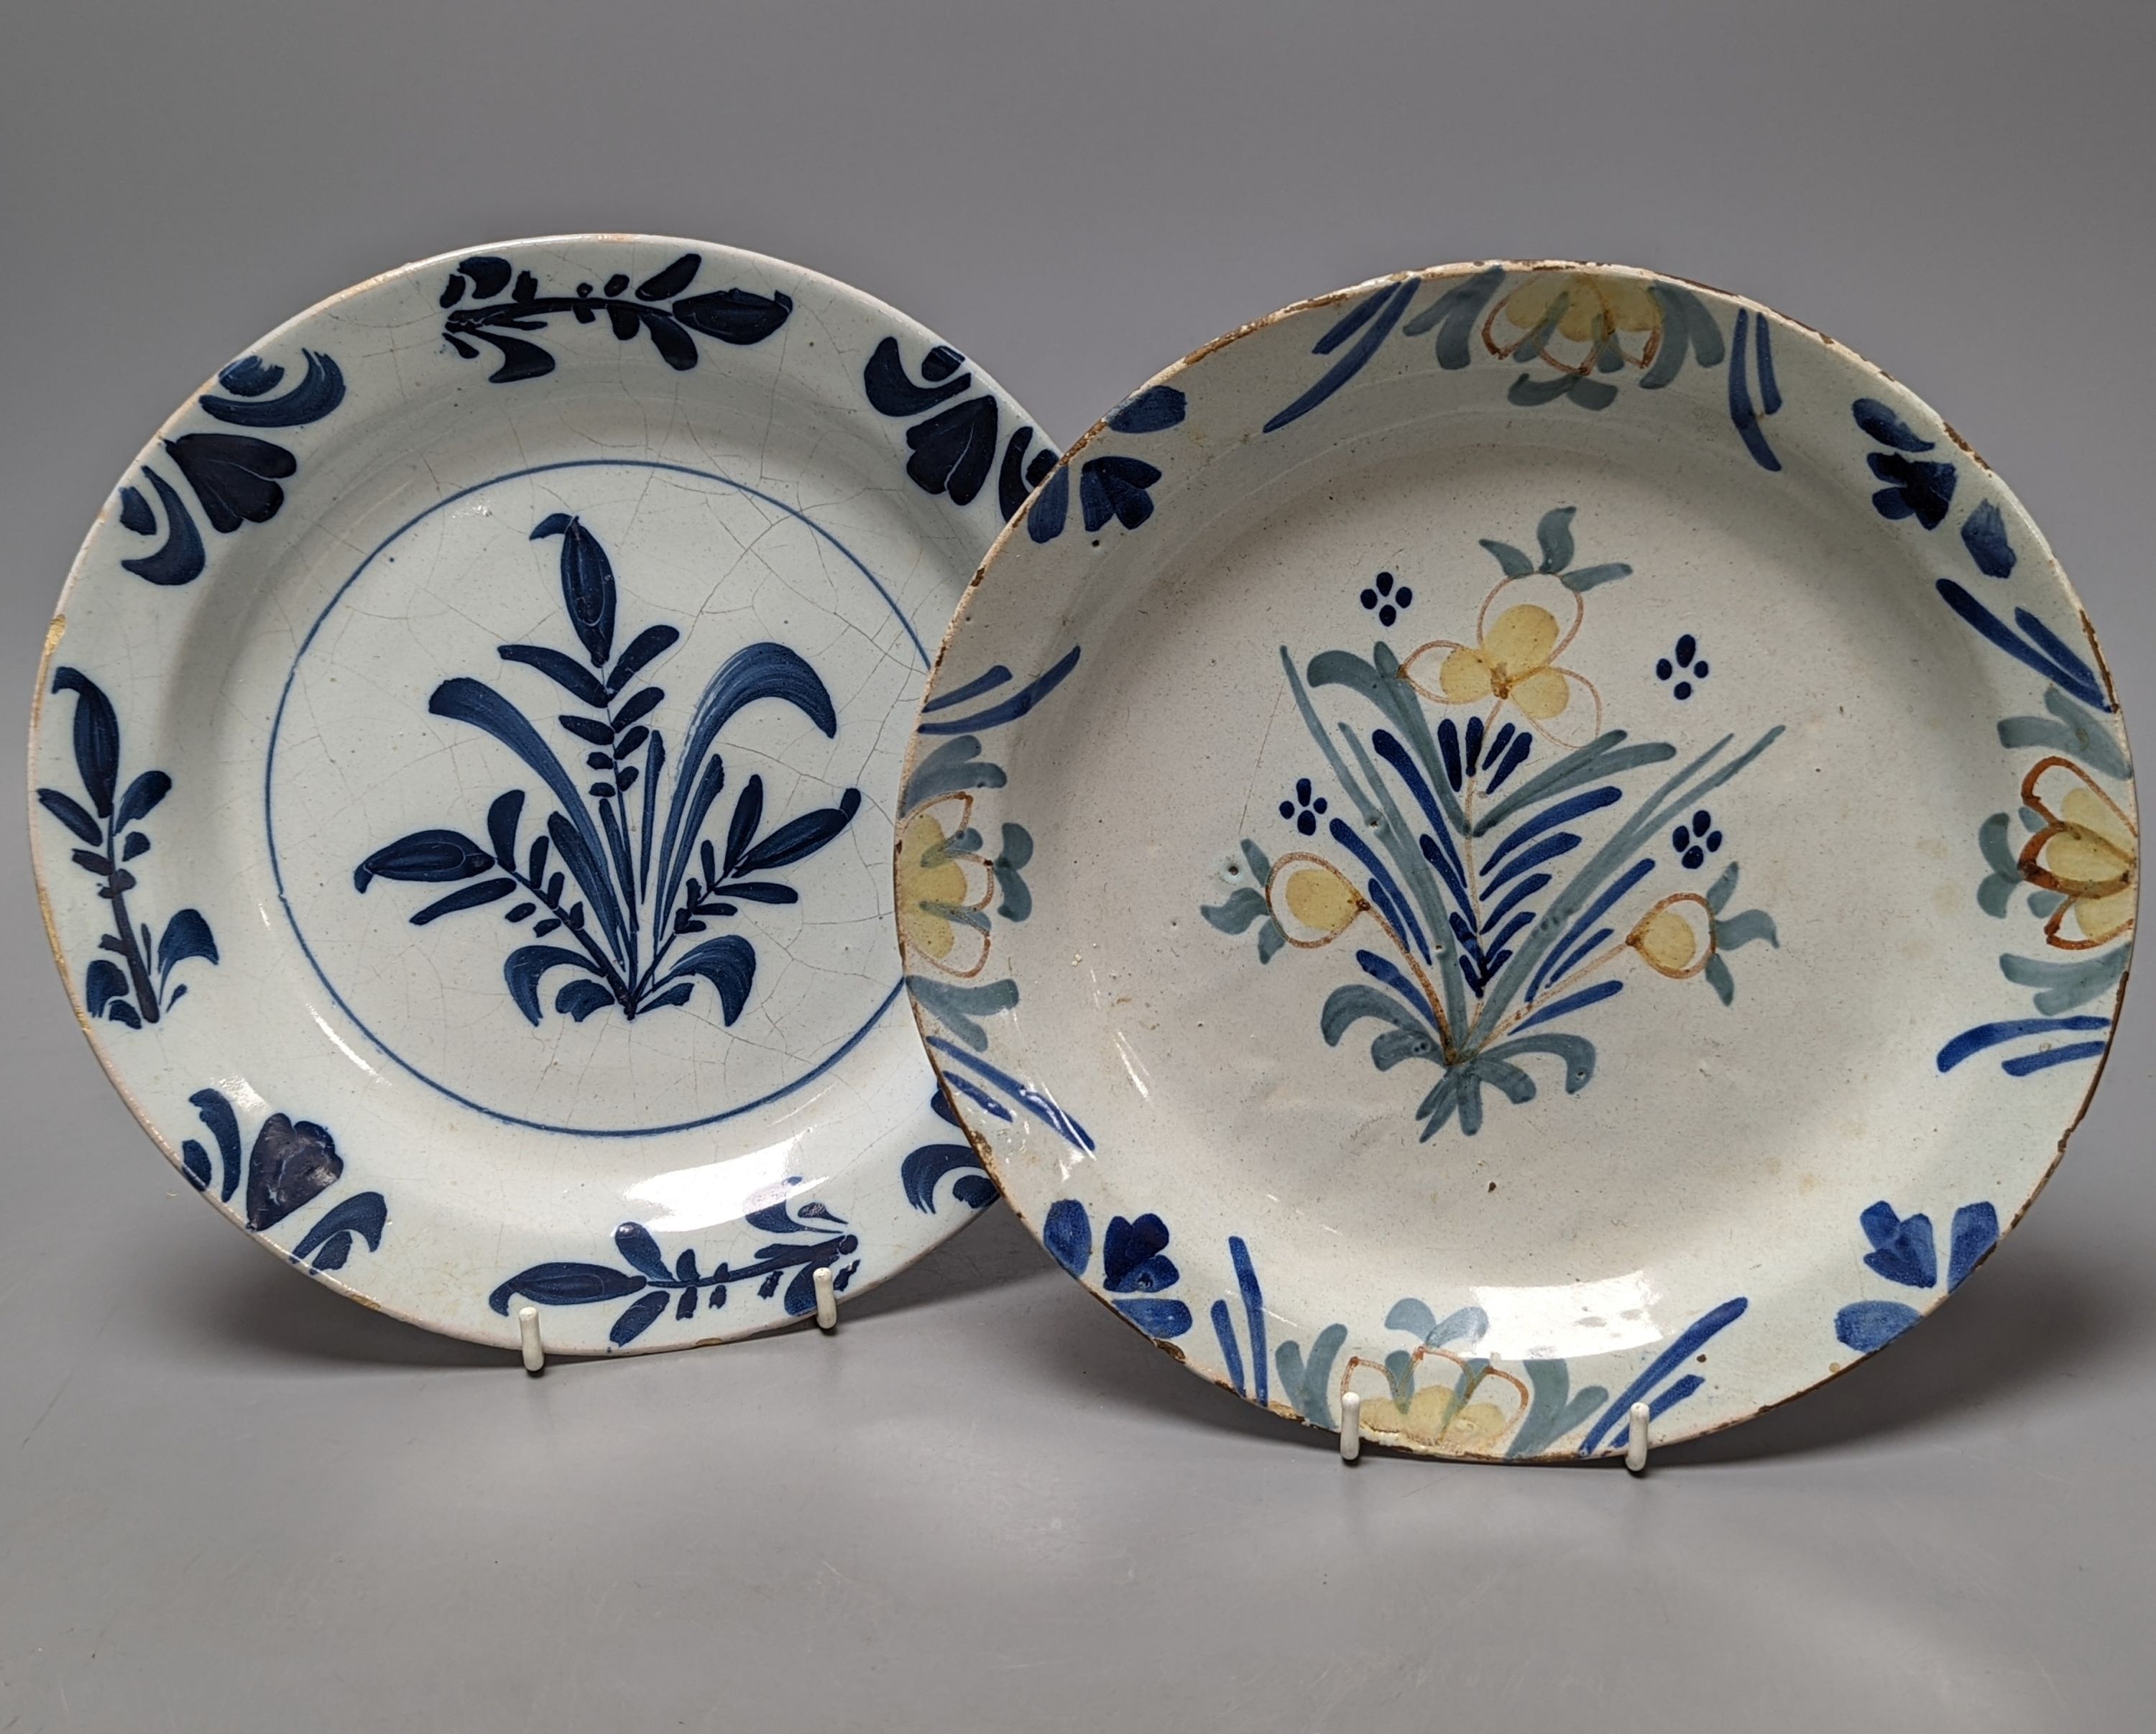 Seven English and Dutch delftware plates and dishes, c.1700-1760, 22 - 23cm, some damage